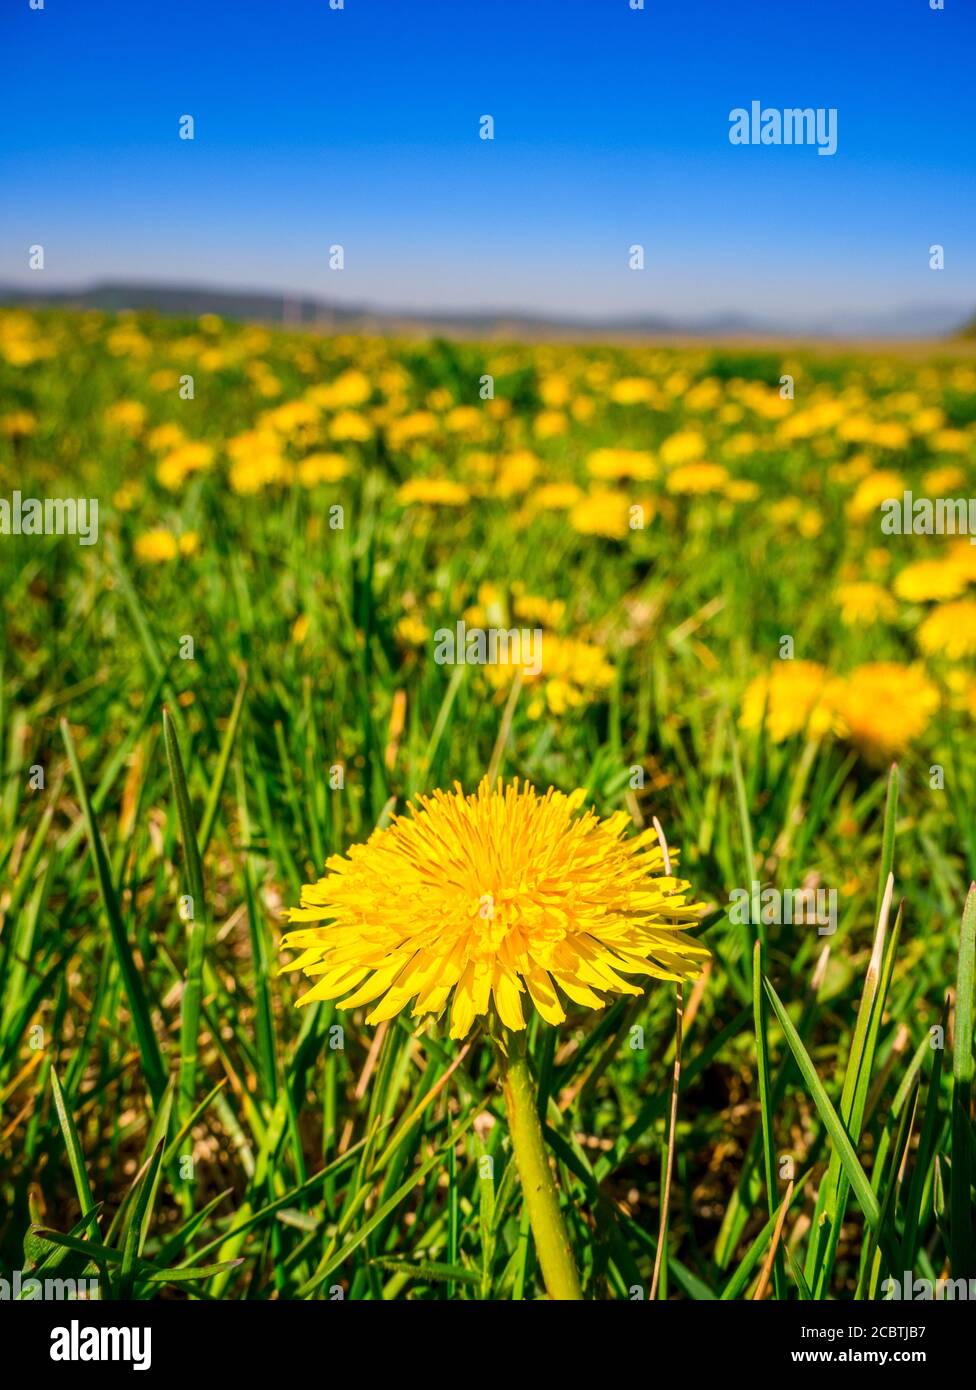 Selective focus on a dandelion (Taraxacum officinale) in the foreground, in a meadow full of blooming dandelions in a blurred background Stock Photo